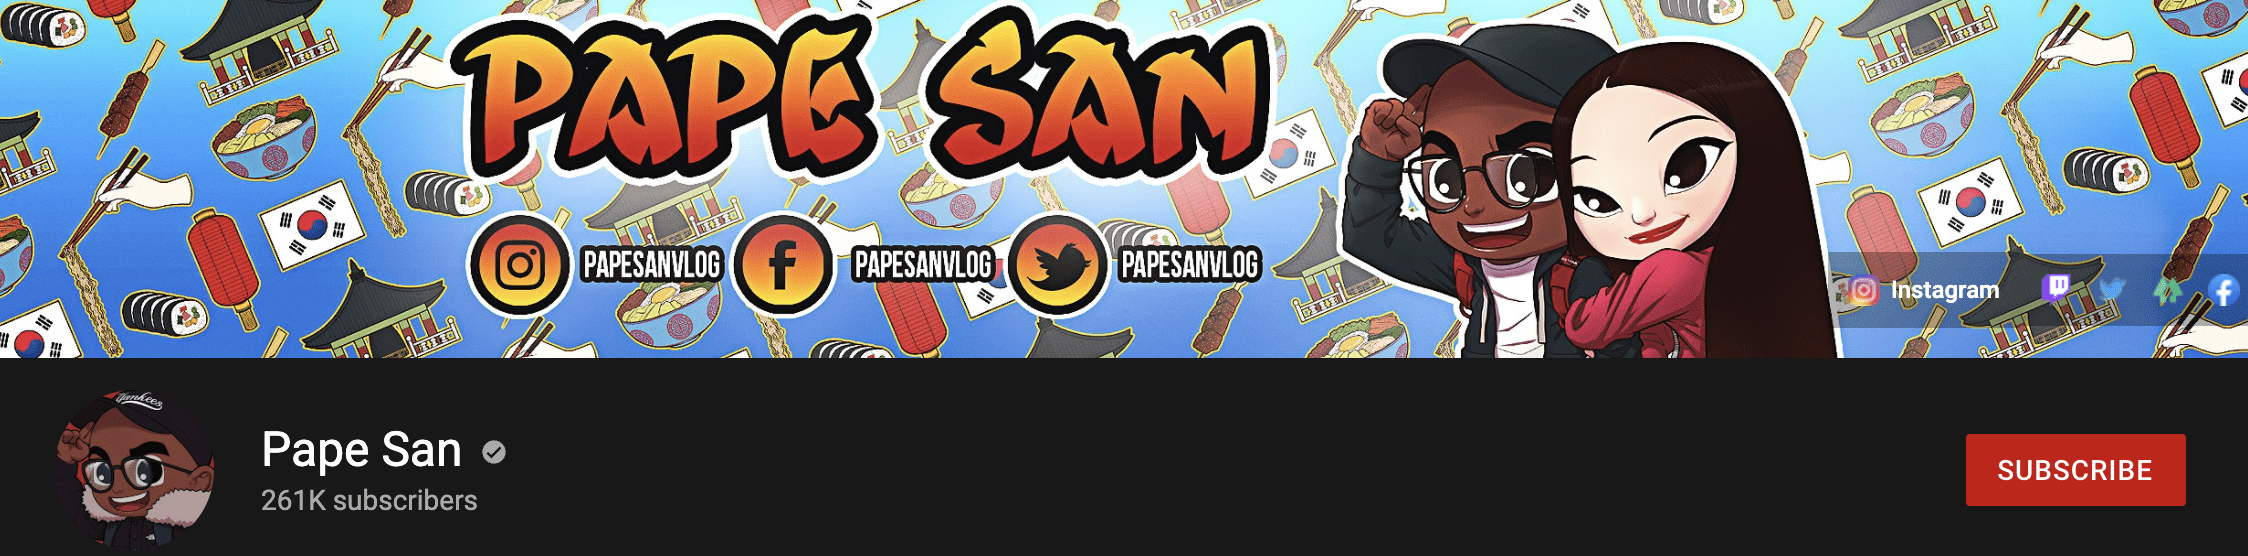 Pape San Youtube Channel